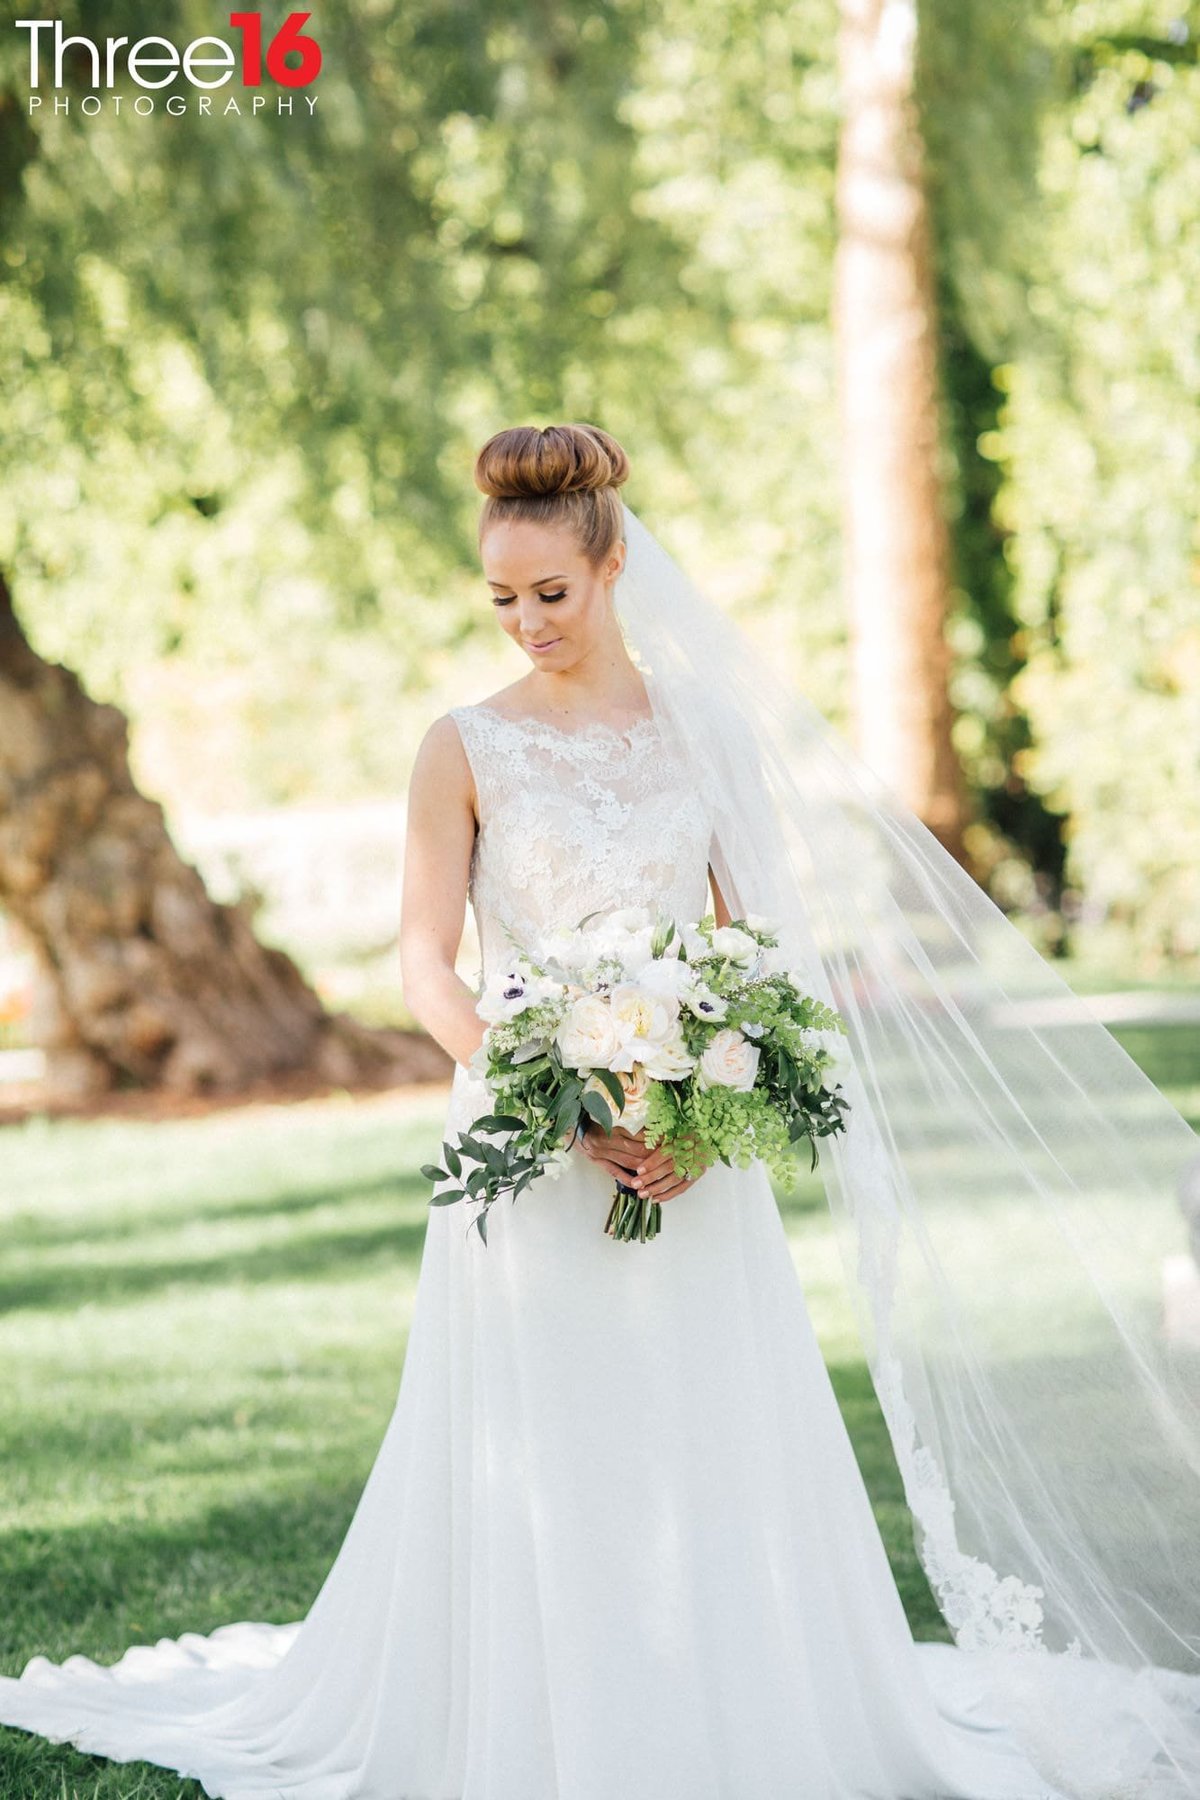 Beautiful Brides poses for the wedding photographer